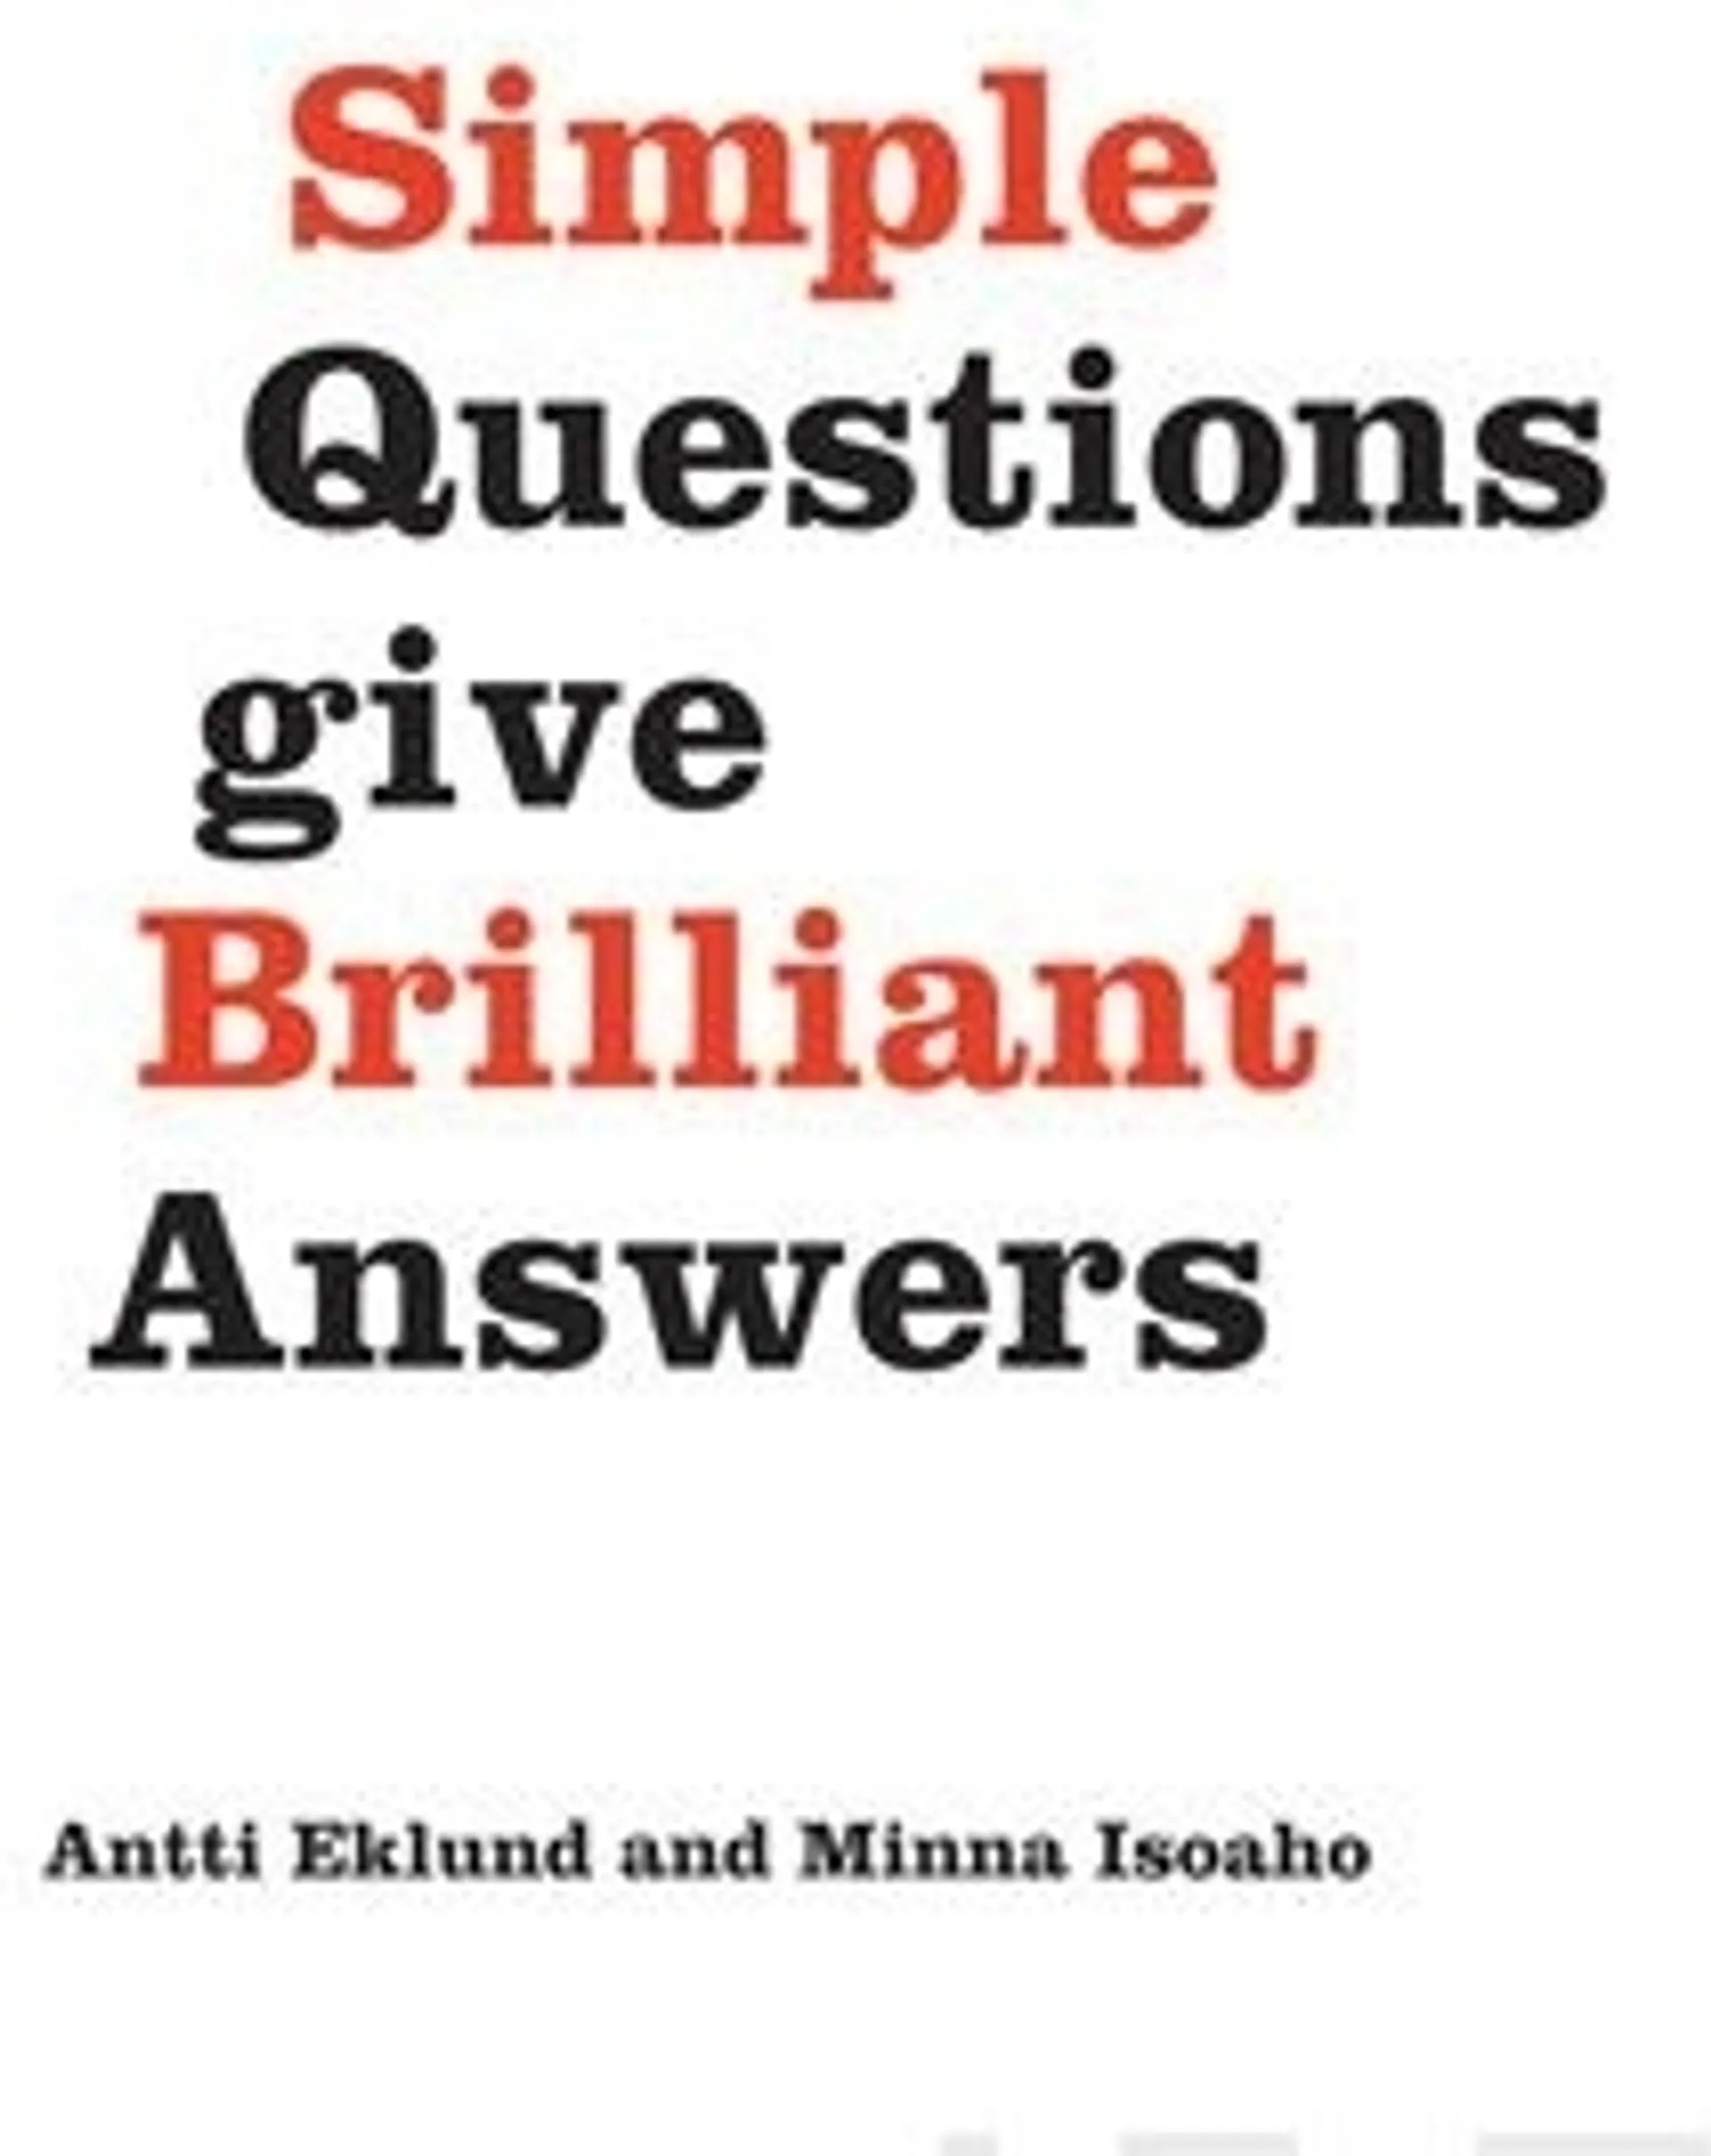 Eklund, Simple Questions give Brilliant Answers